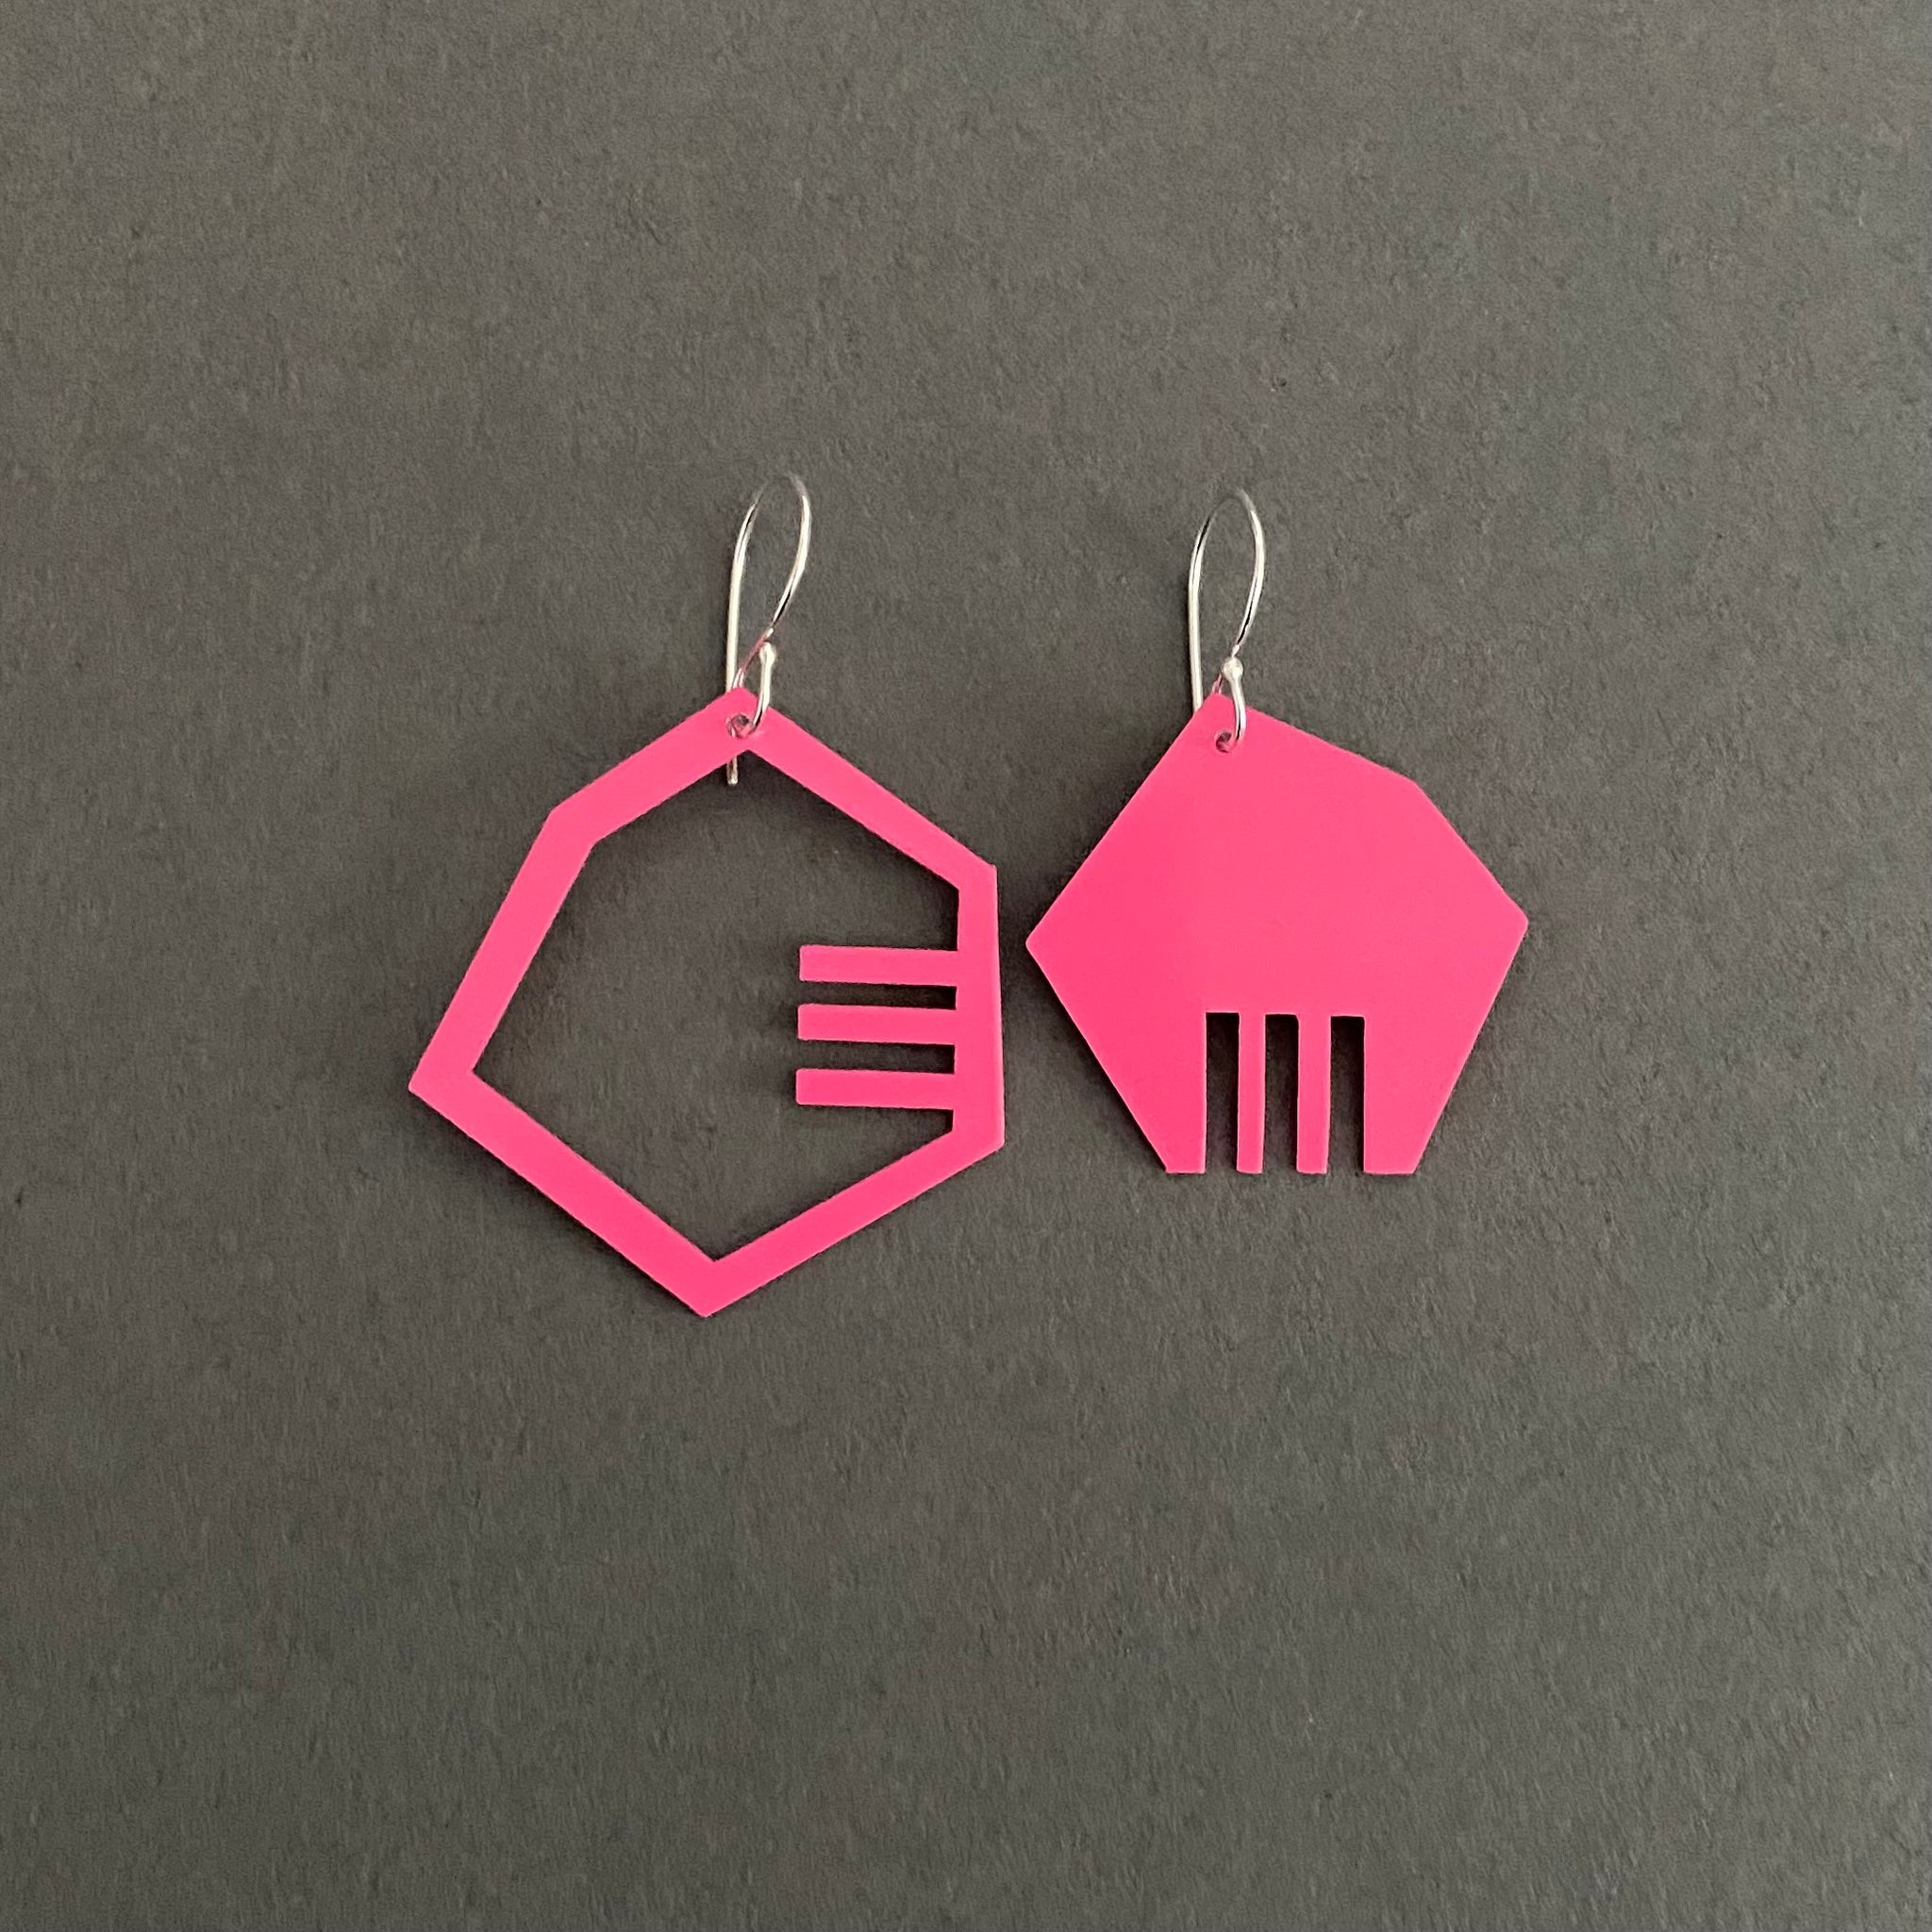 +/- Earrings - Small, Sassy Pink